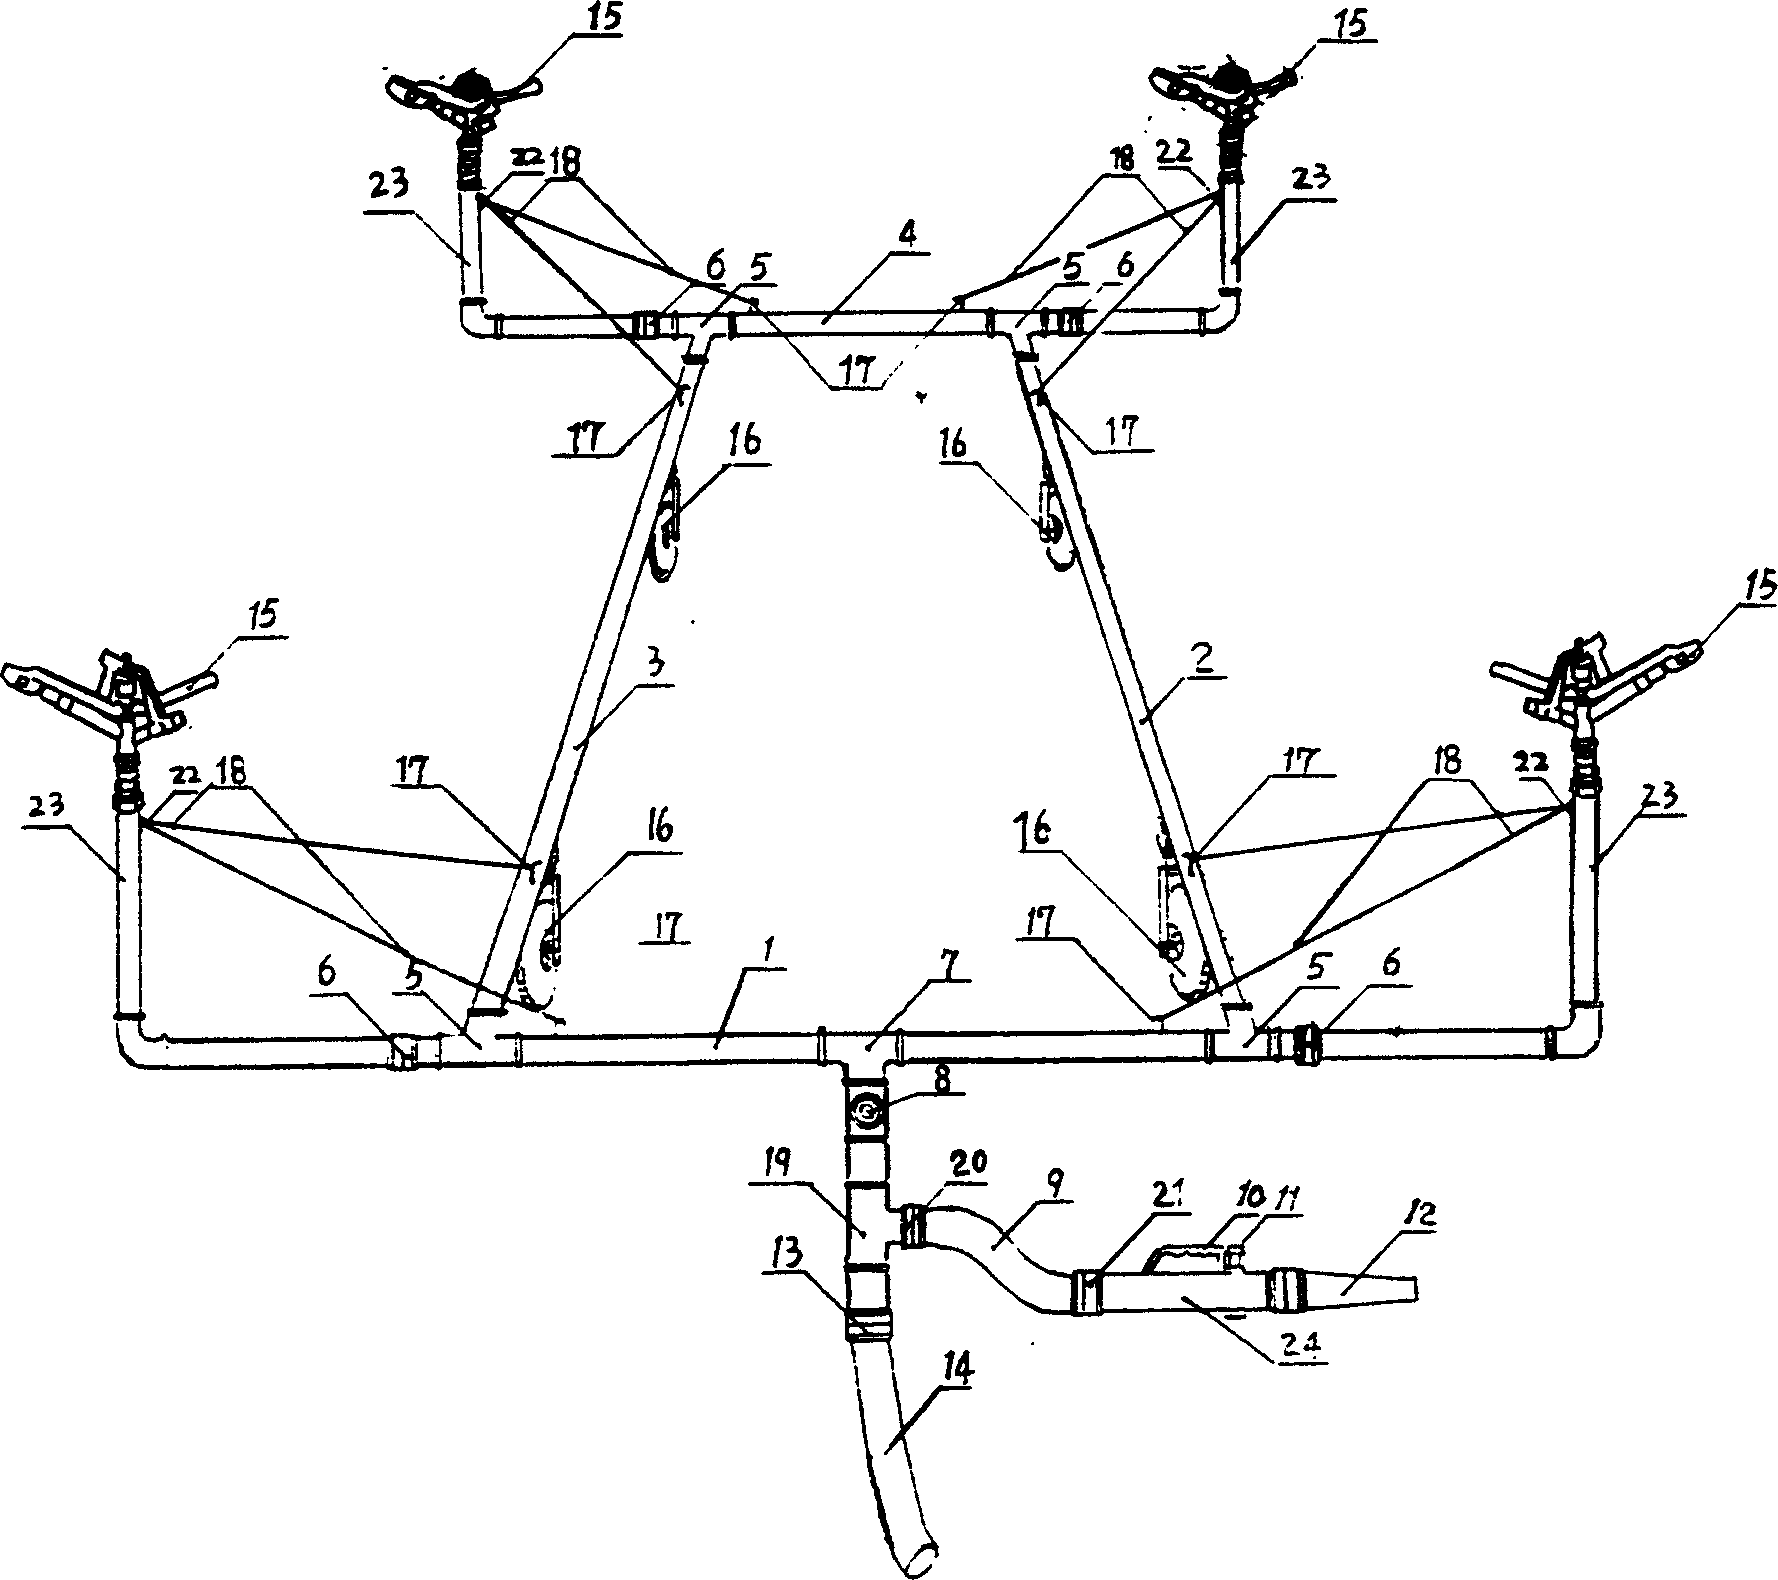 Device for quick governing sandstorm and adhesive spraying